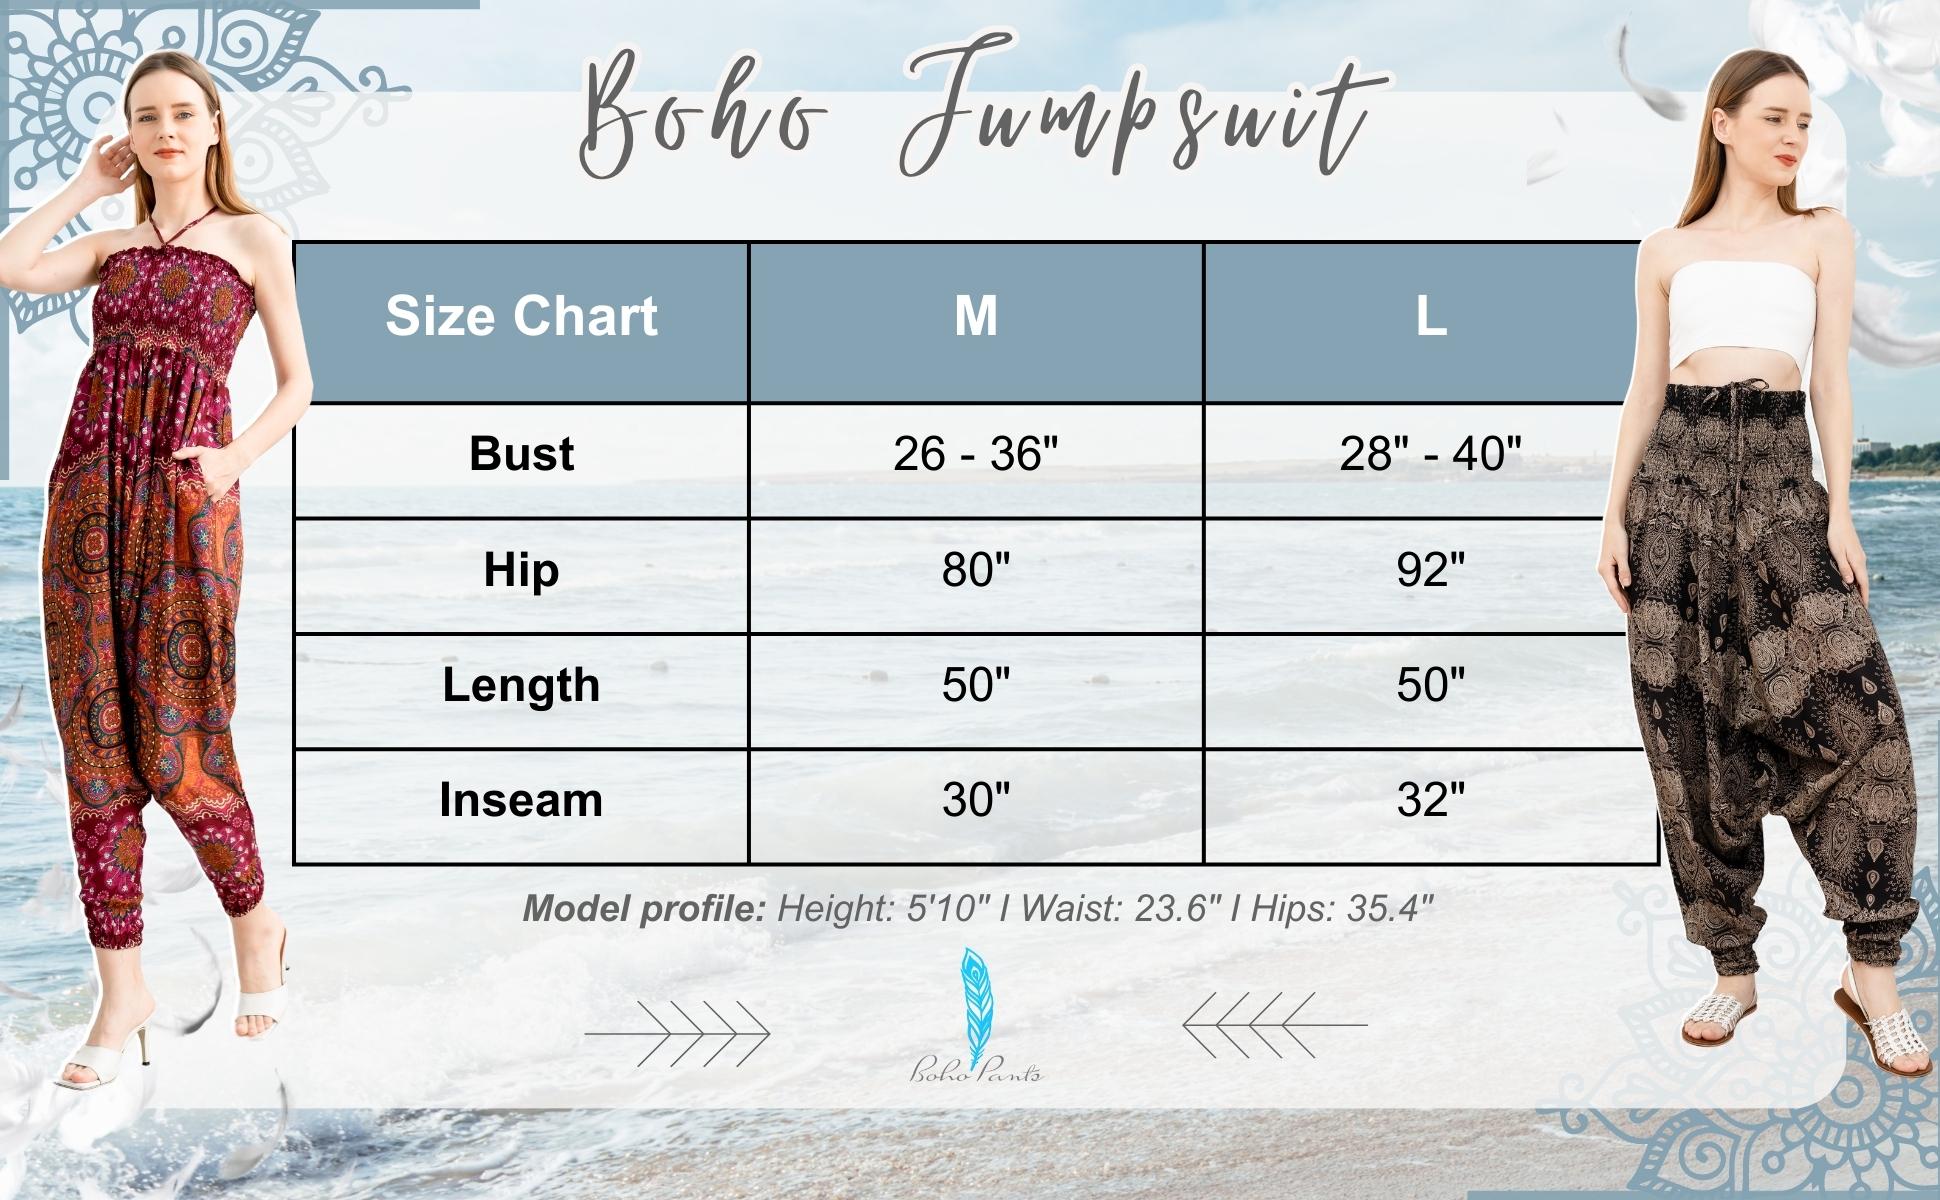  Find your perfect fit with our Boho Jumpsuit size chart - Discover measurements and dimensions for each size option